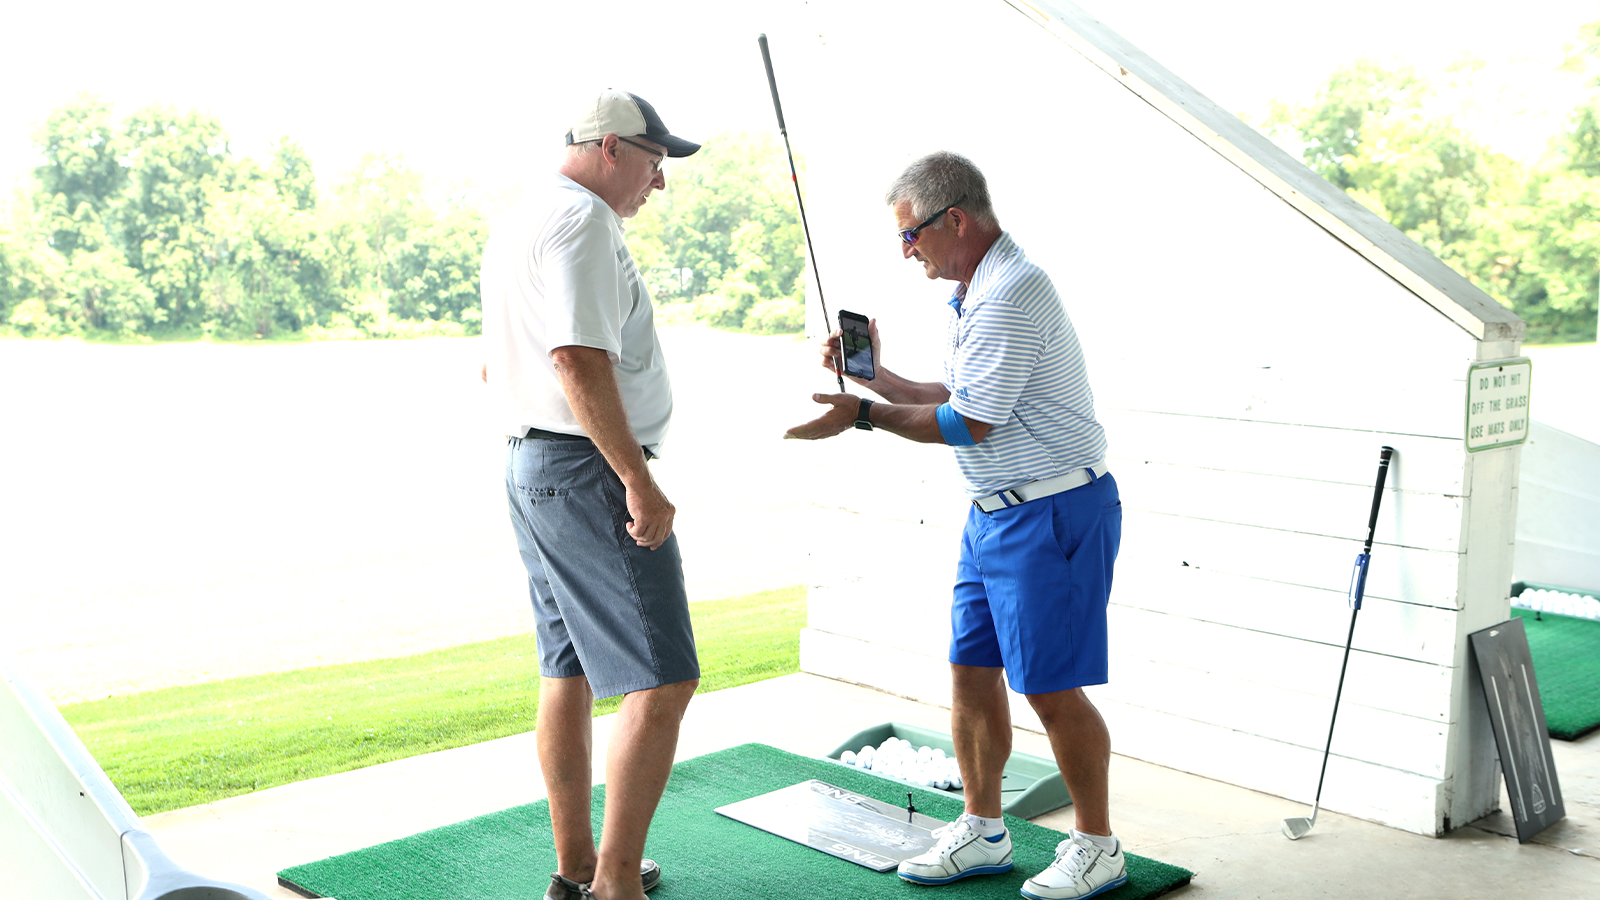 Discussing the various club elements during a fitting at Sittler Golf. 